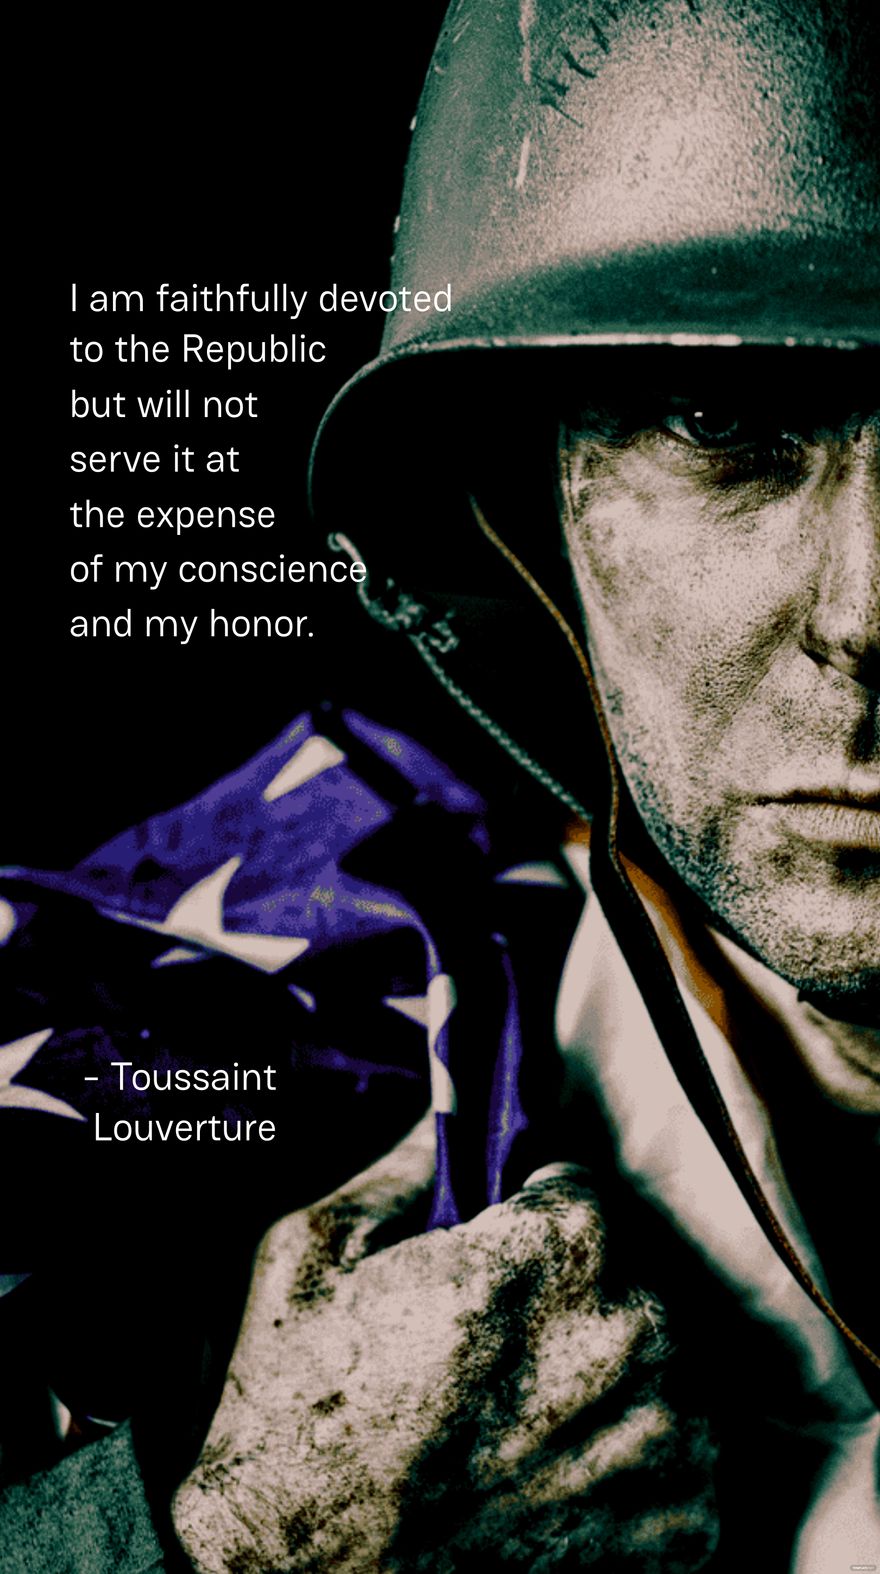 Free I am faithfully devoted to the Republic but will not serve it at the expense of my conscience and my honor. - Toussaint Louverture